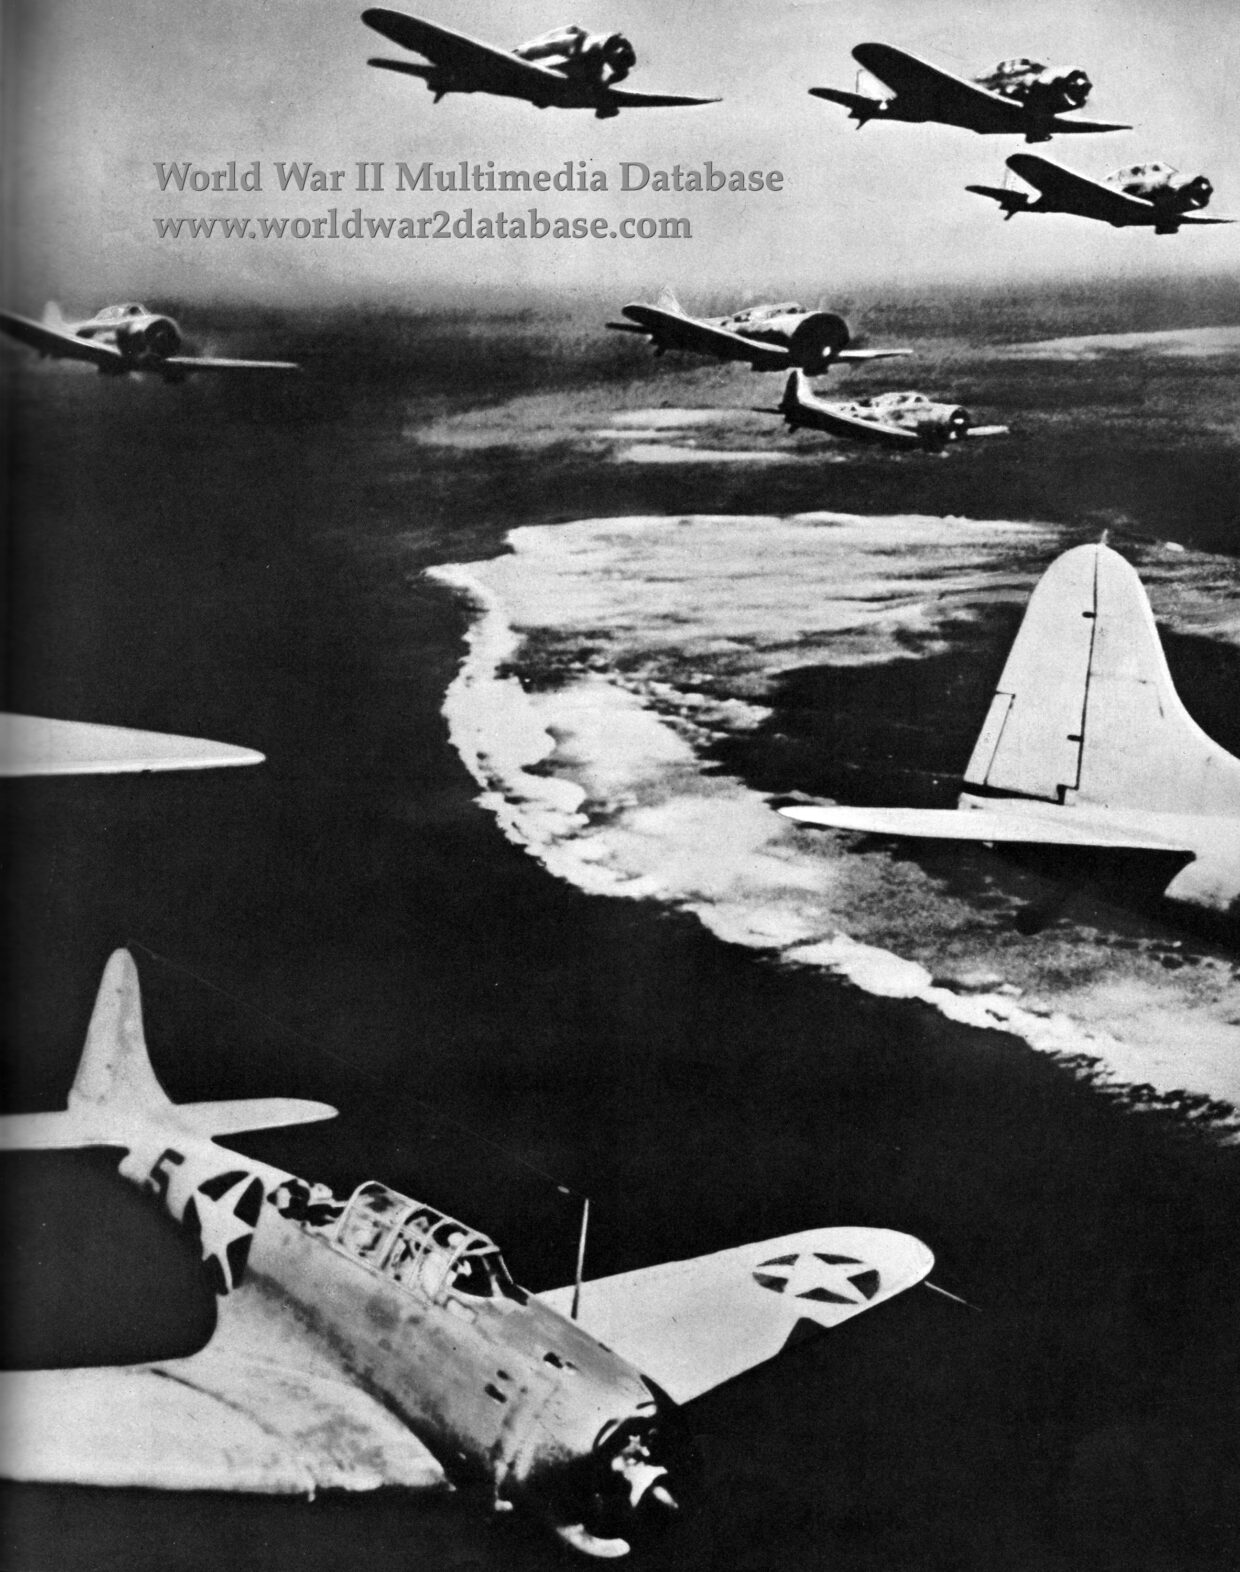 SBD-3 Dauntlesses of VMSB-241 Over Midway Atoll